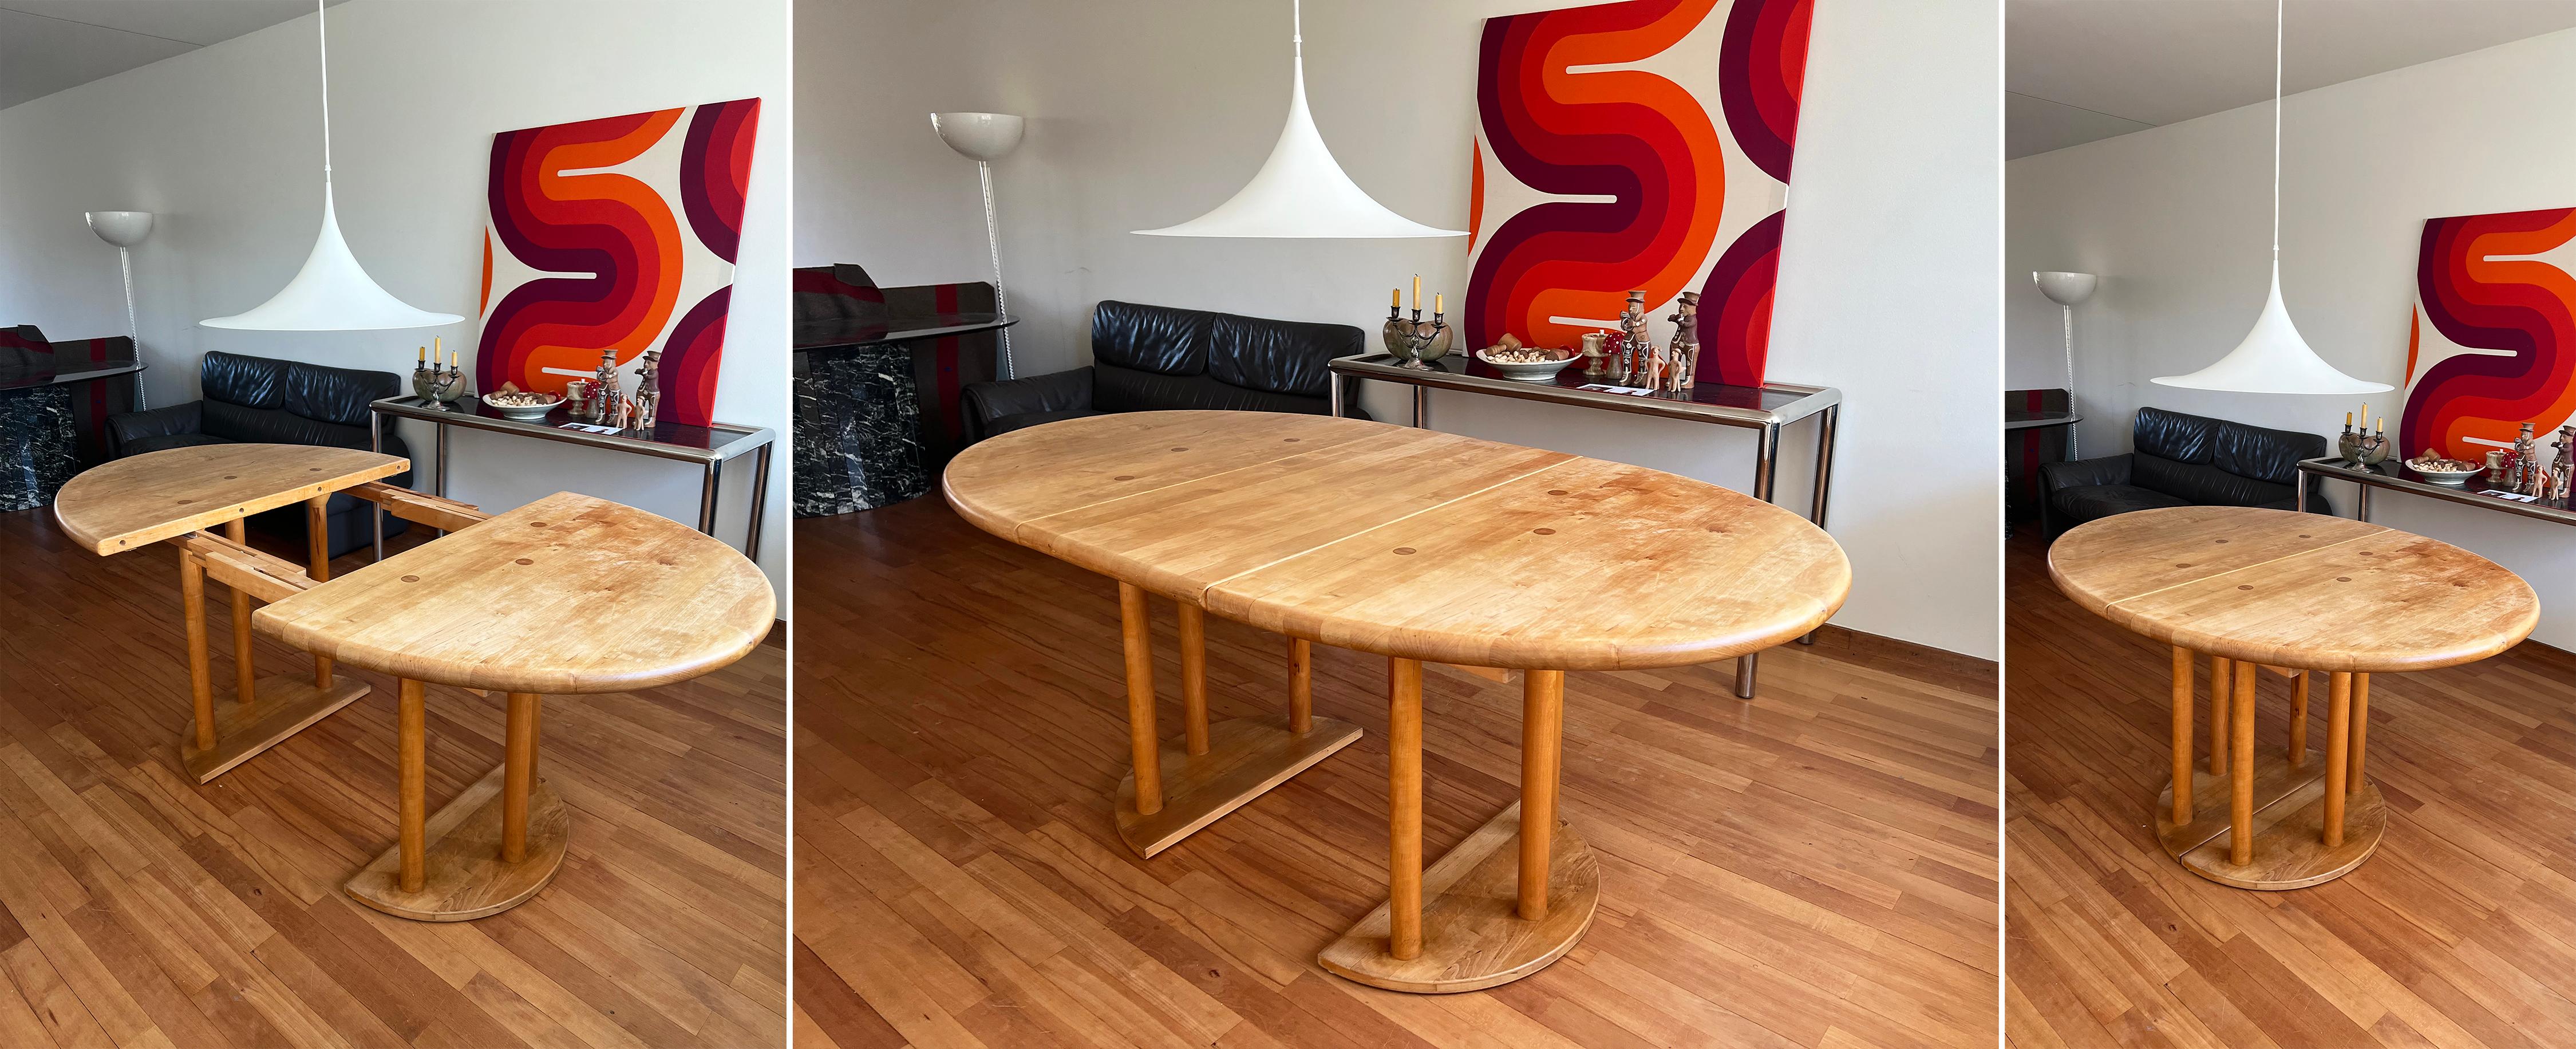 Absolutely incredible, and very stylish Brutalist dining table with an additional extendable leaf.

Extreme attention to detail on these masterfully made chairs and table--Sculptural elements throughout, excellent joint detailing and superb